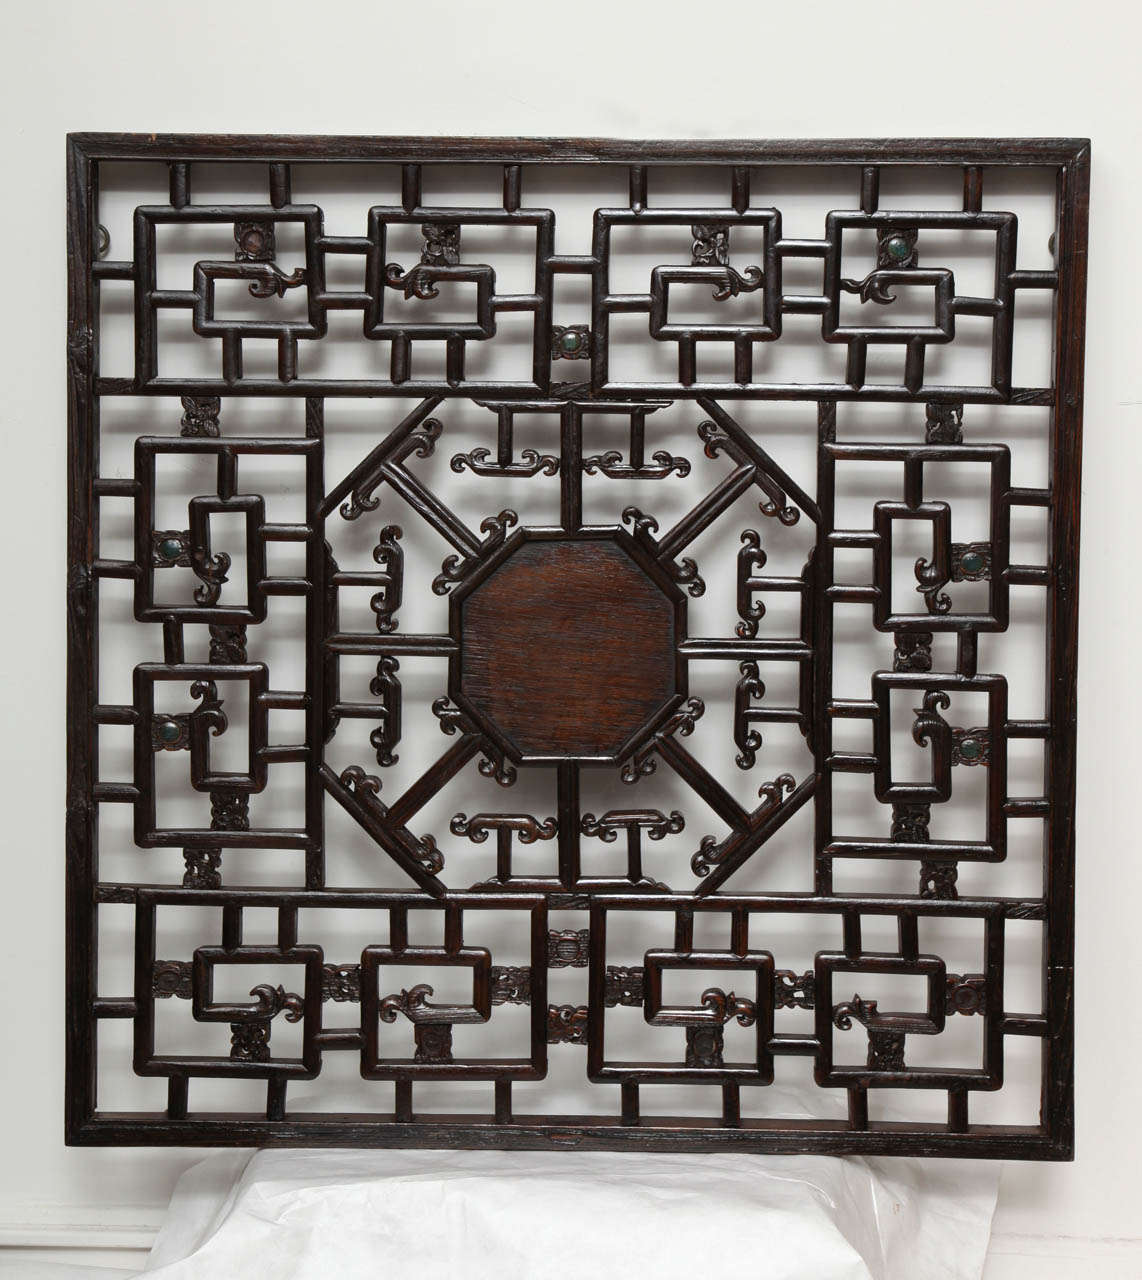 An elwood lattice screen panel with a Classic Chinese pattern and octagonal center and carved accents. Use as wall decor or divider. Center panel can be removed. Suitable for mirror backing.